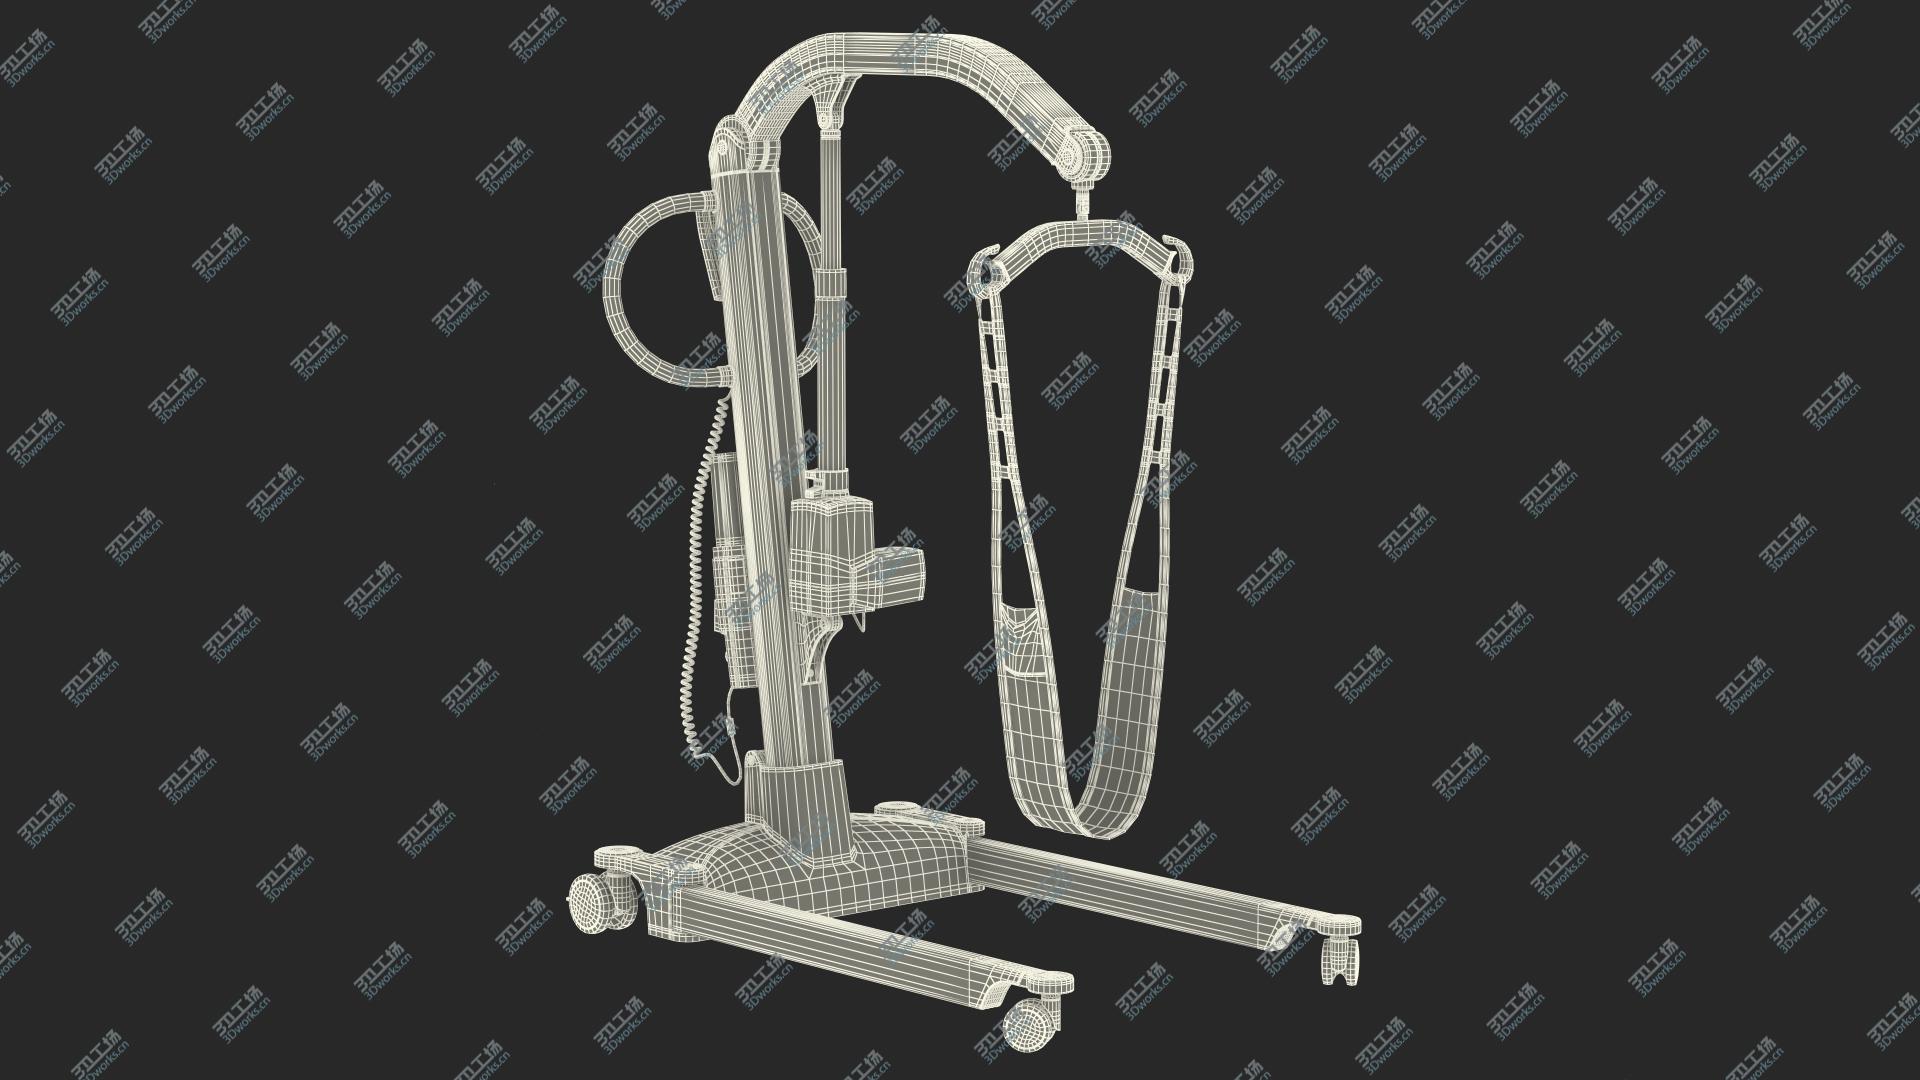 images/goods_img/202104091/Patient Lift with Leg Holder model/3.jpg